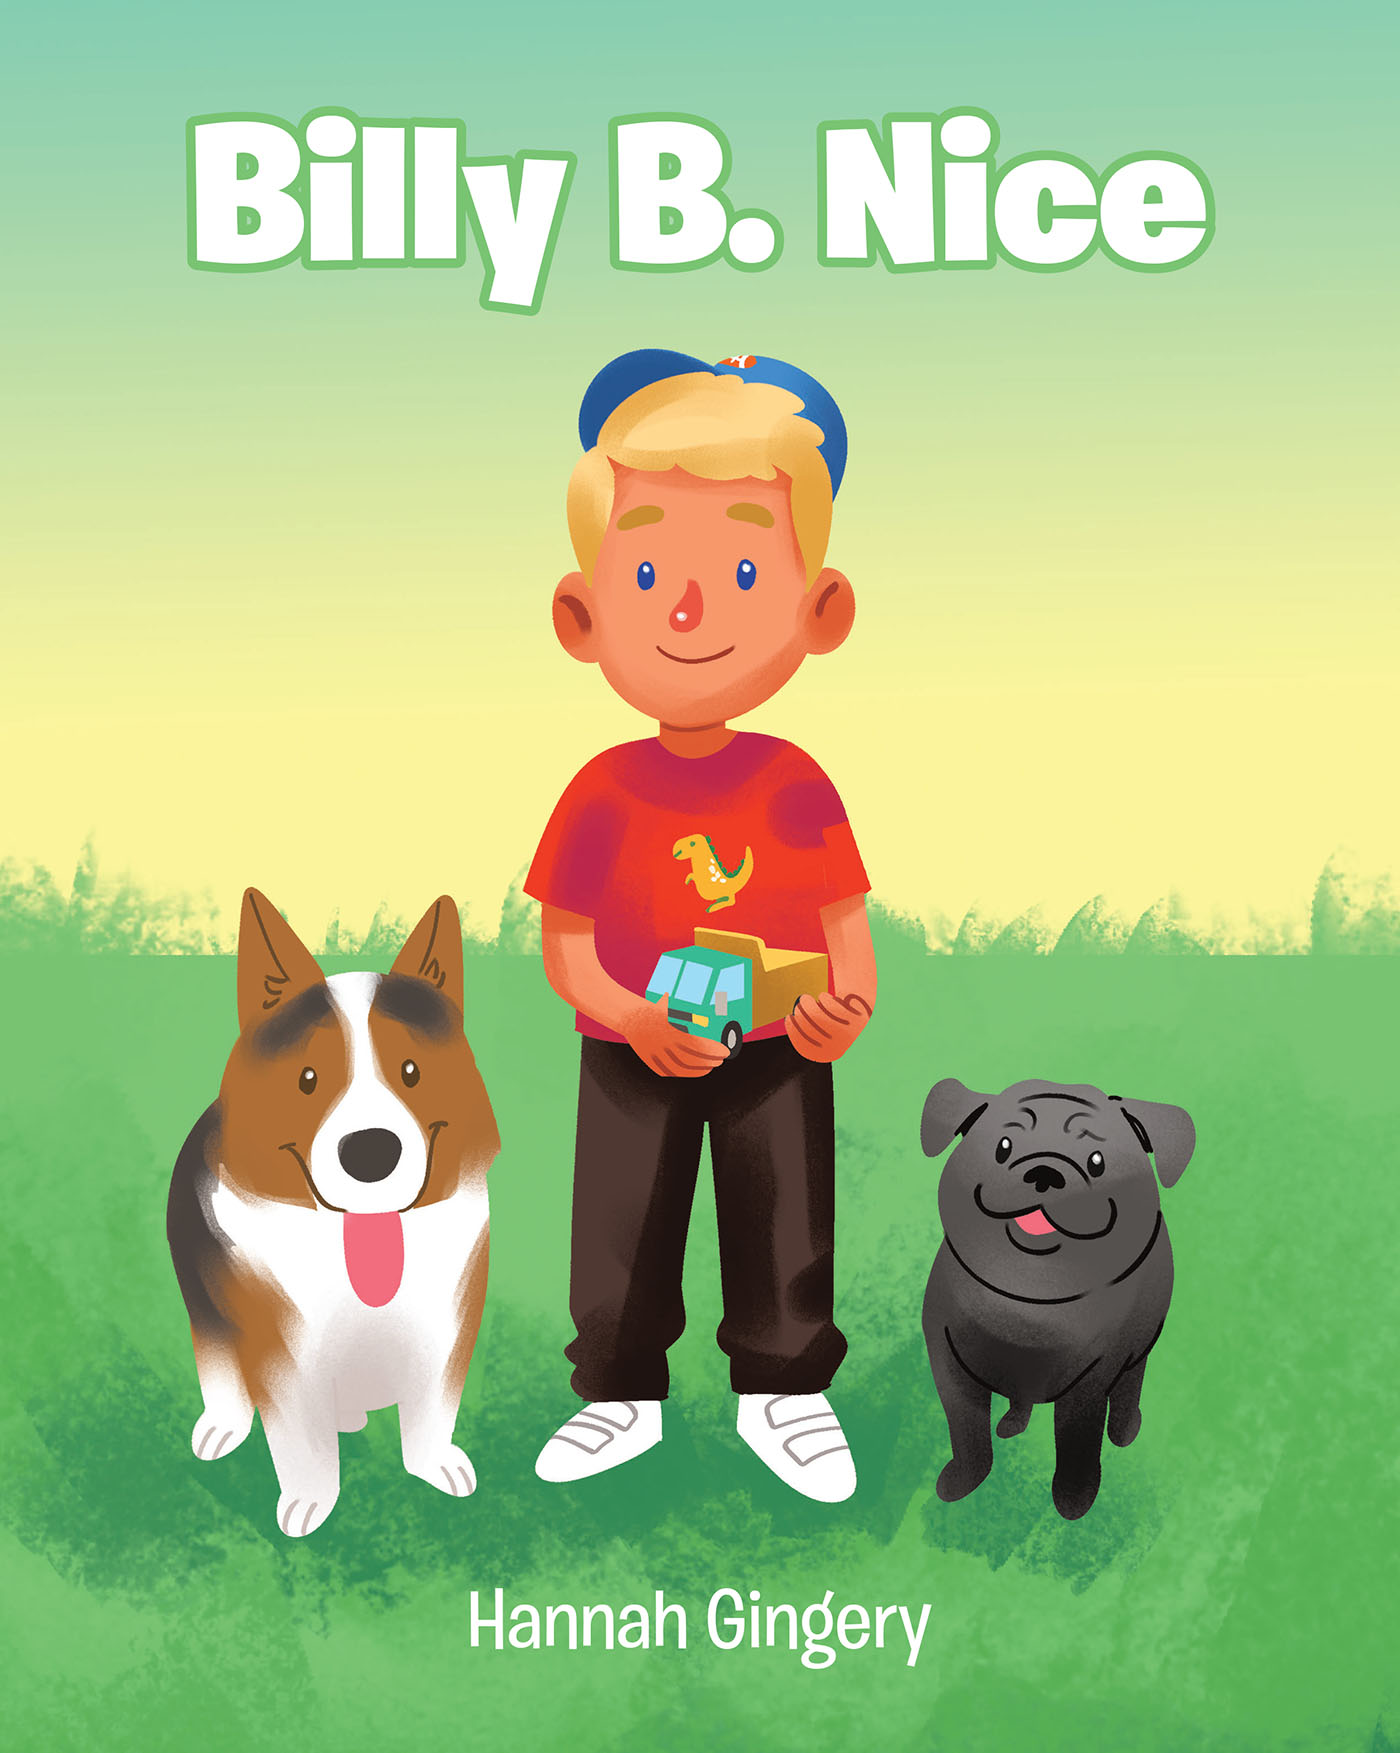 Hannah Gingery’s Newly Released "Billy B. Nice" is a Charming Preschool Adventure That Encourages Being Kind to Others